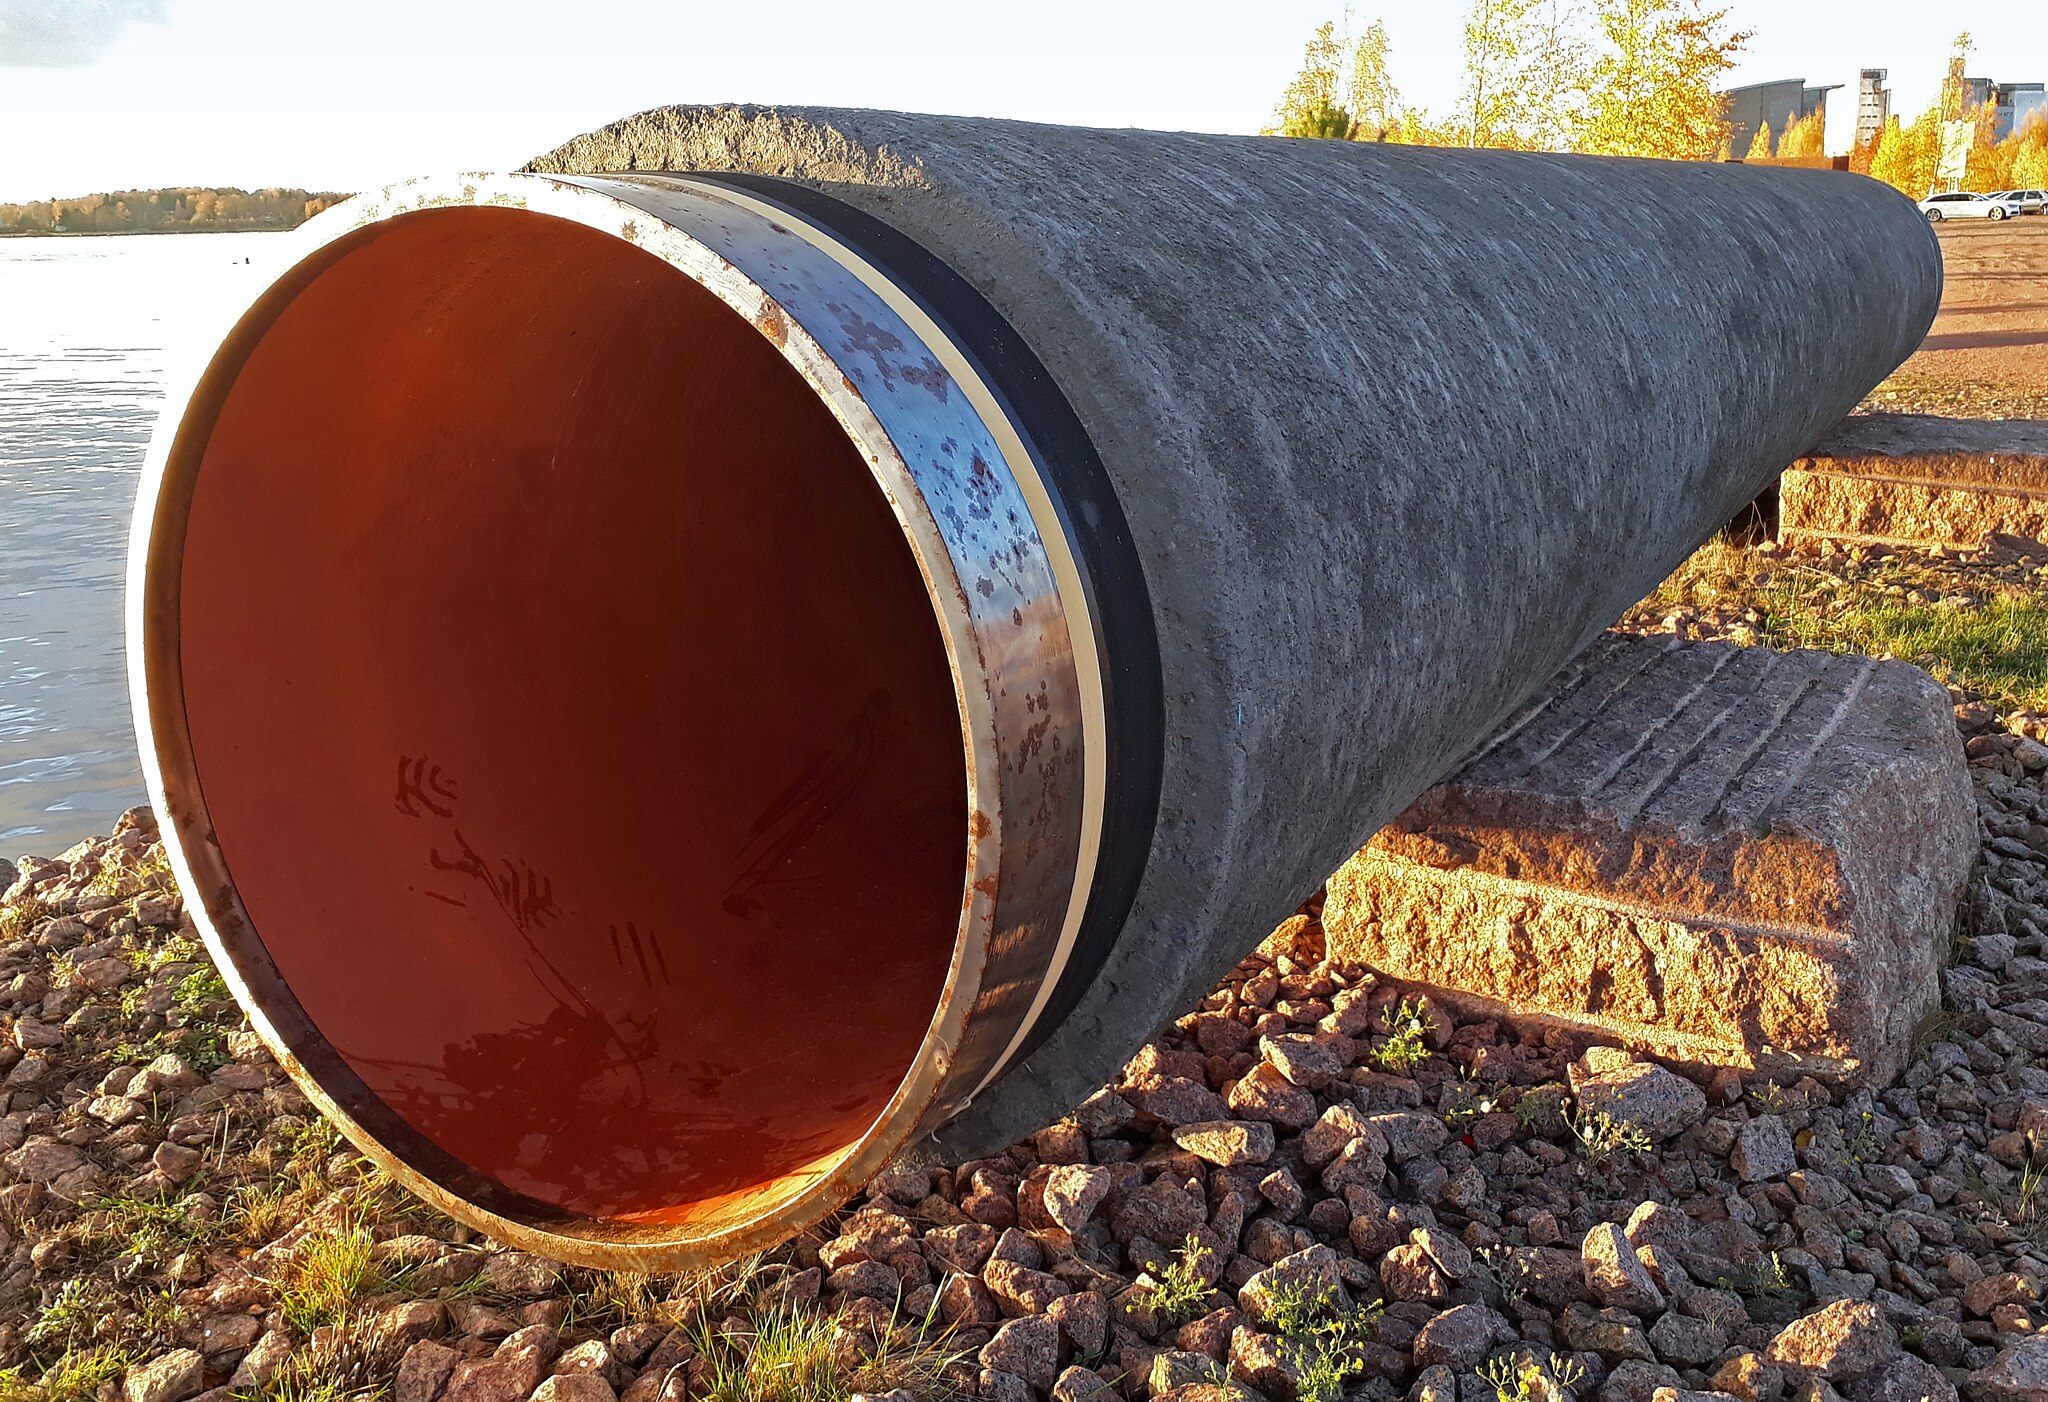 A section of pipeline on display